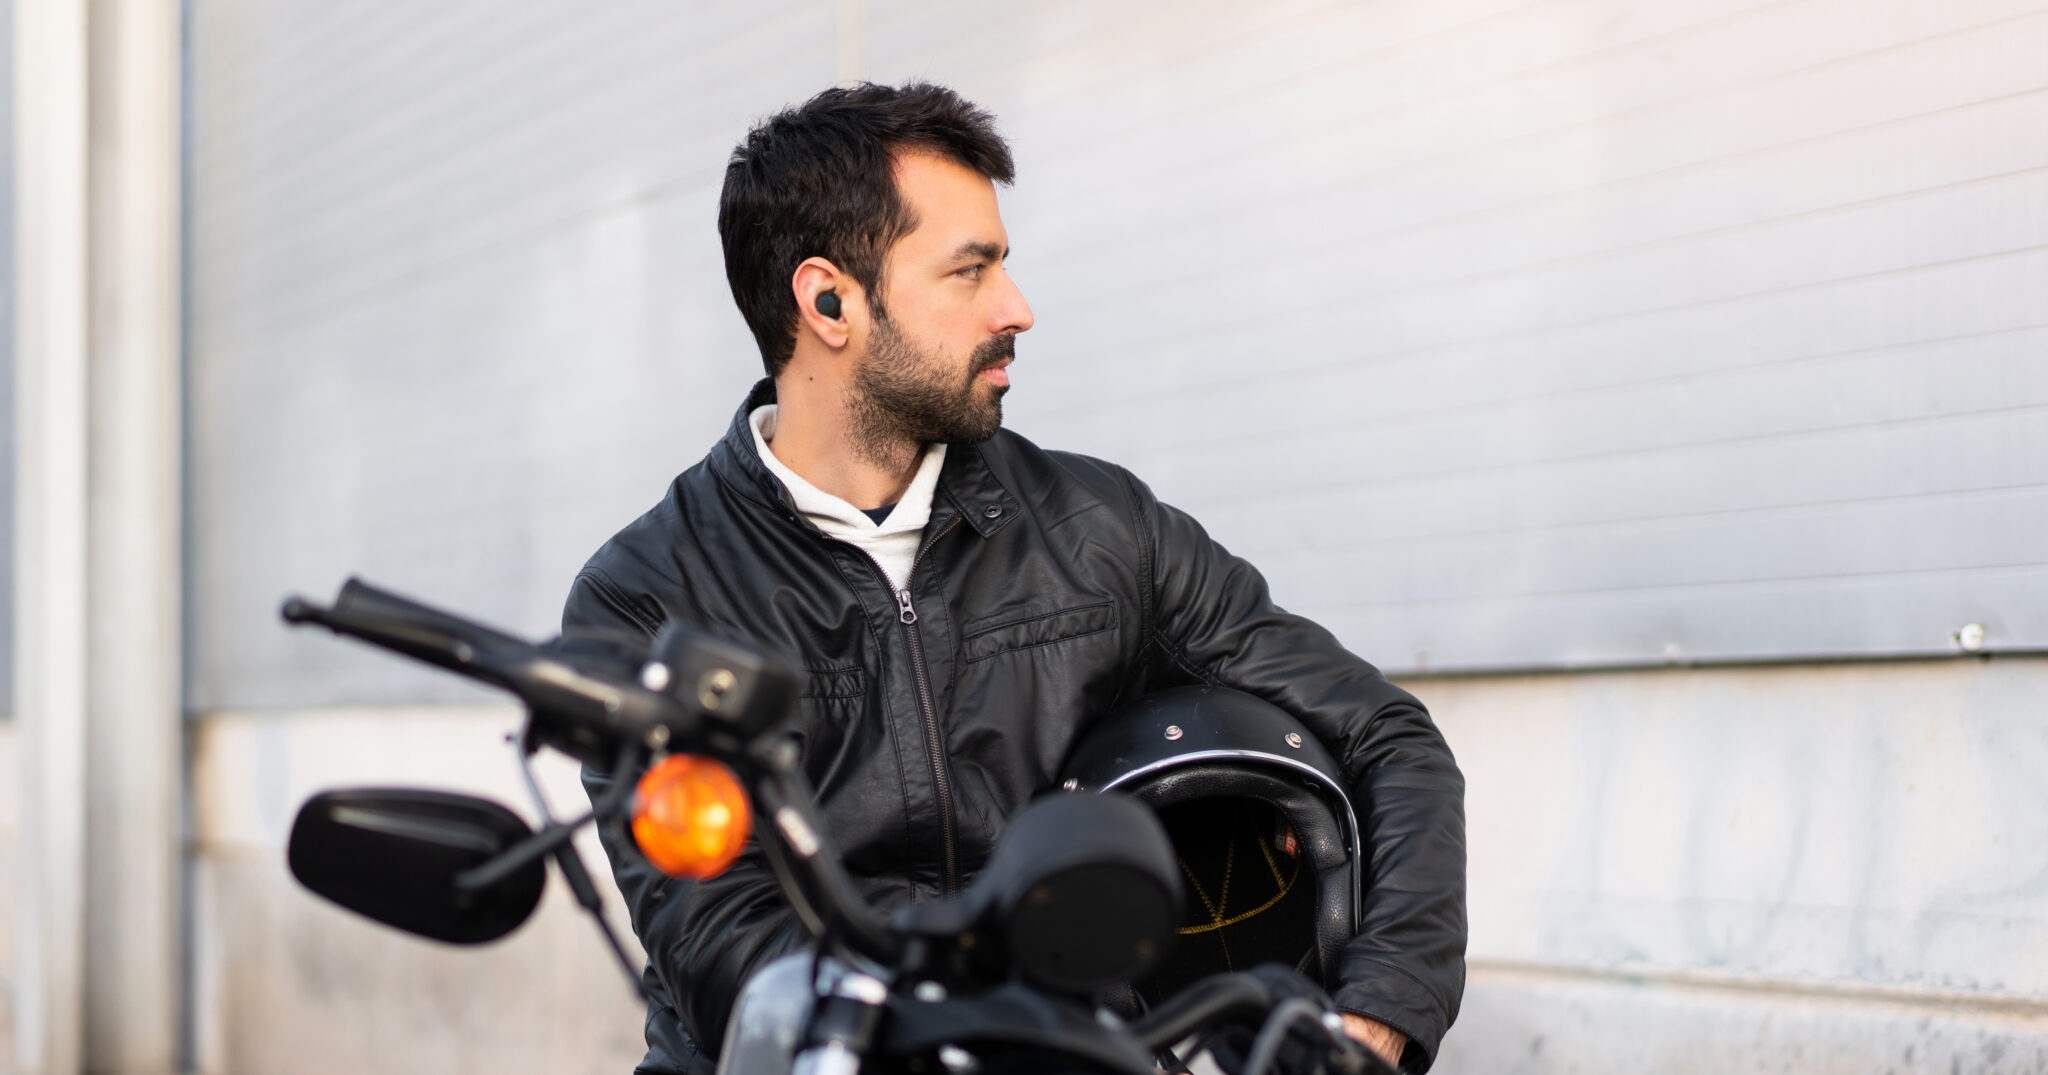 The Safety Importance of Noise Isolation in Motorcycle Earbuds